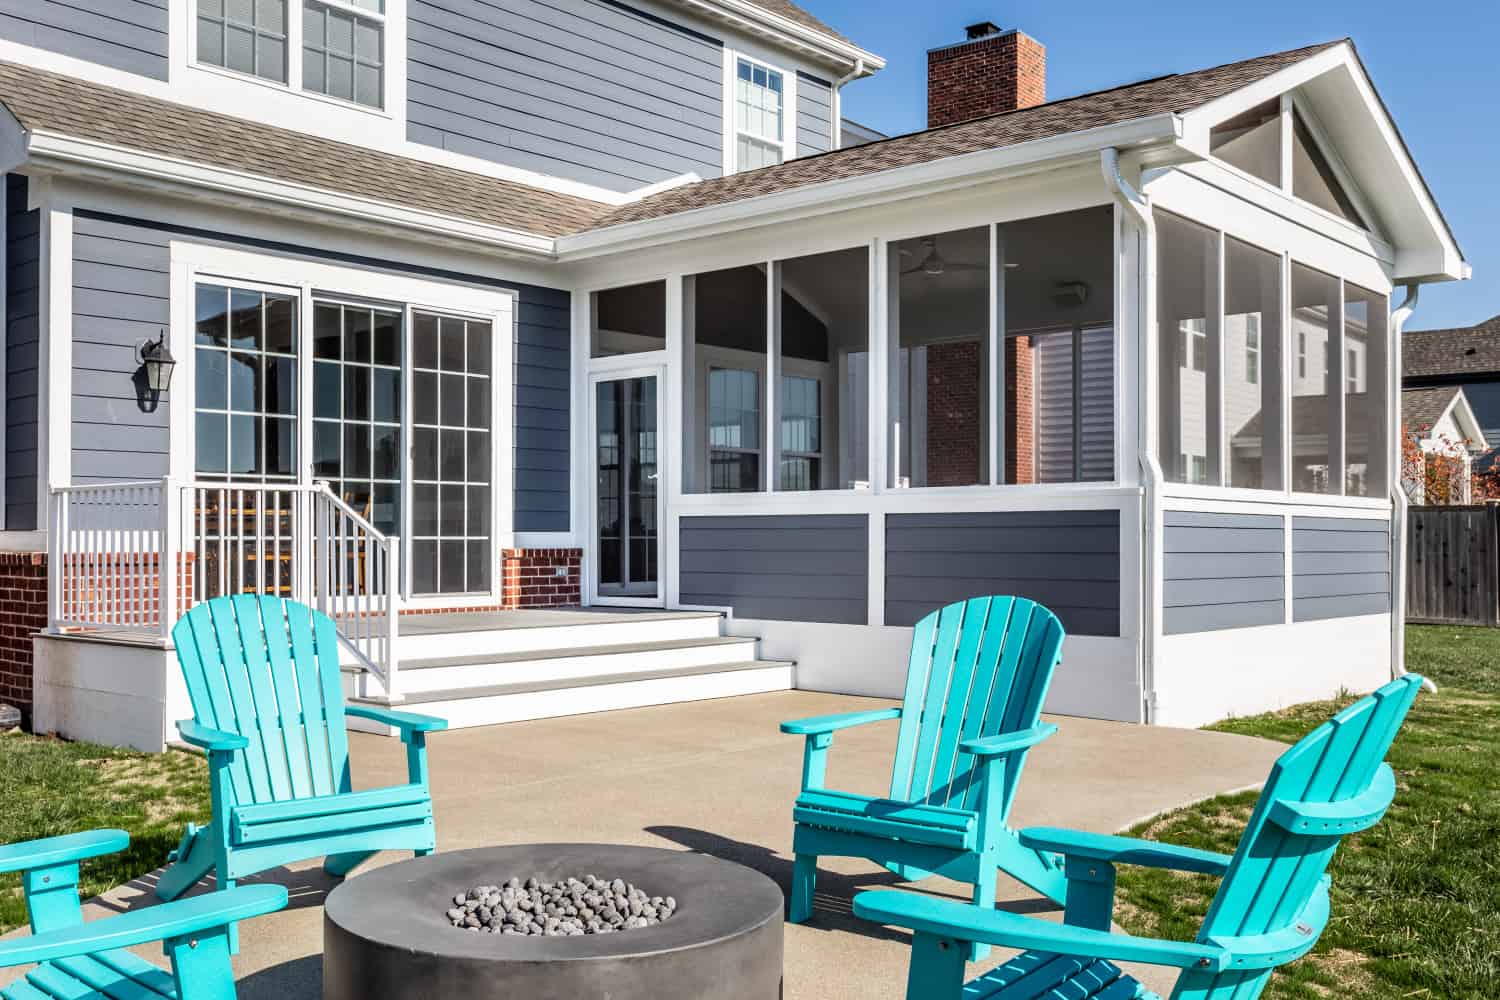 Nicholas Design Build | Remodel a patio with blue chairs and a fire pit.